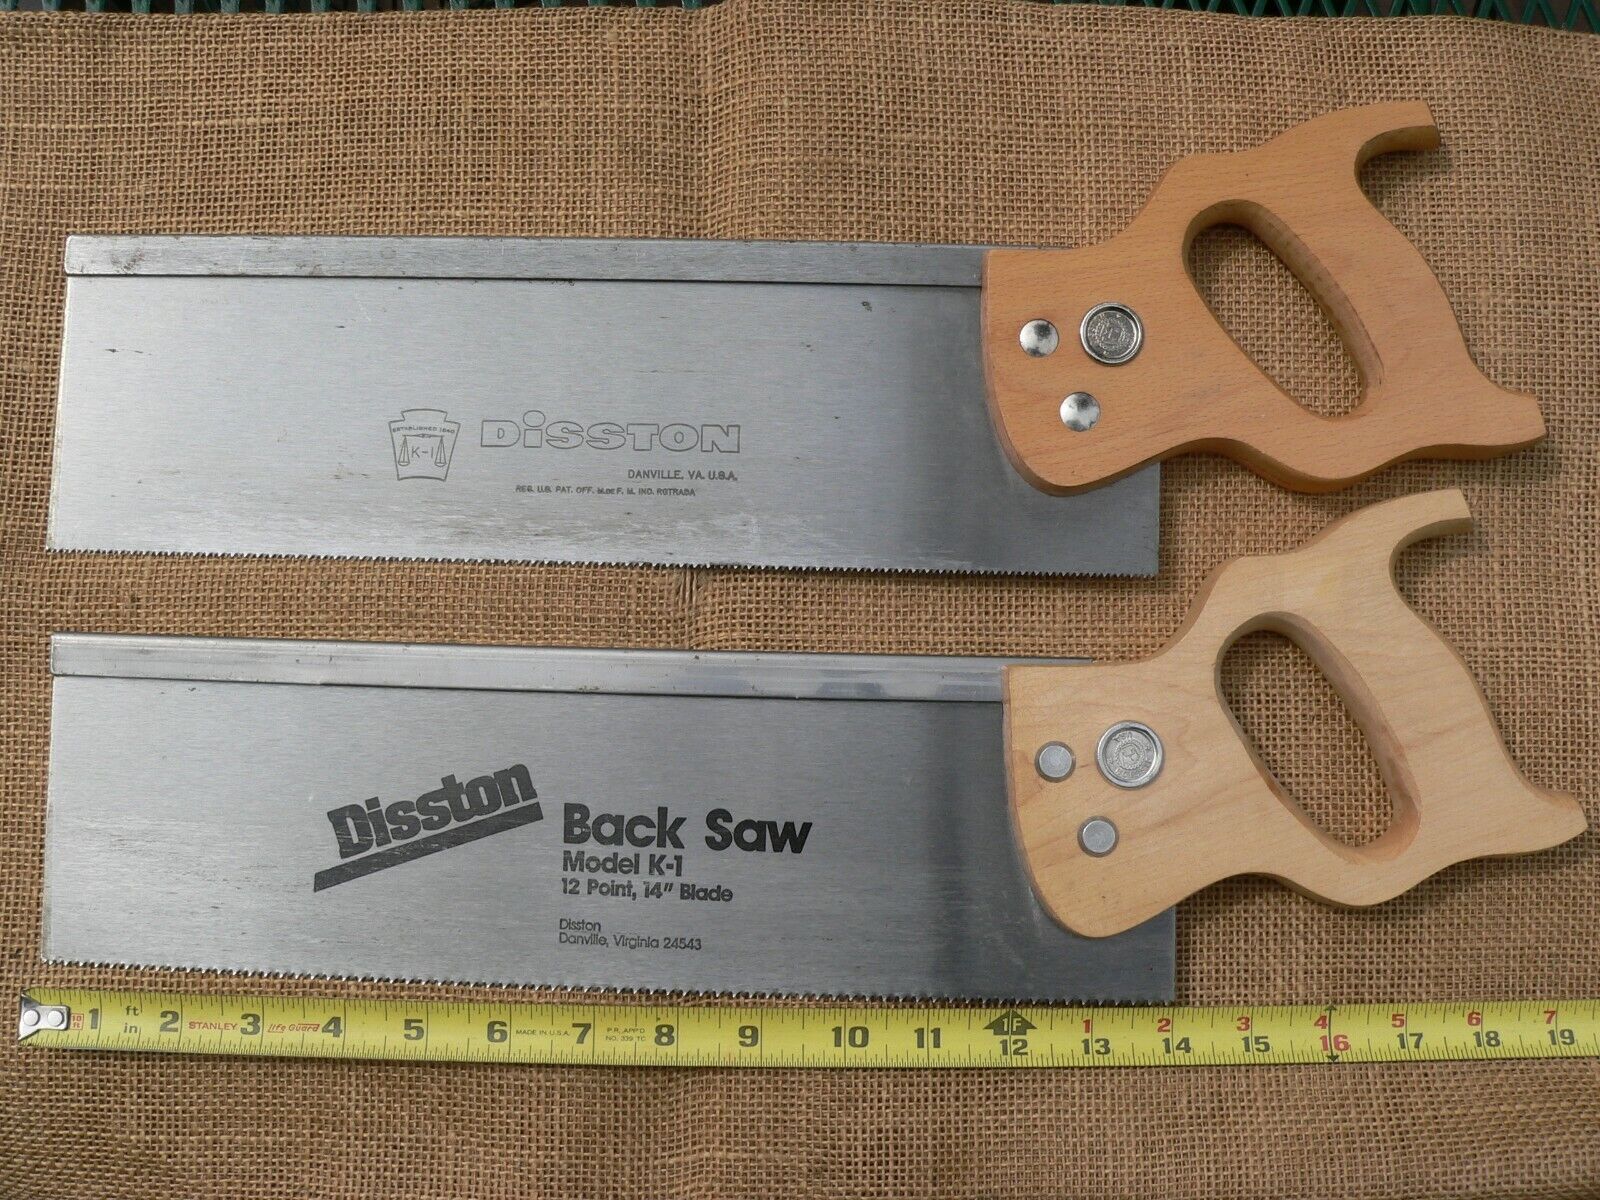 Disston K-1 Model Back Saws - 2 Saws, Made in U.S.A.